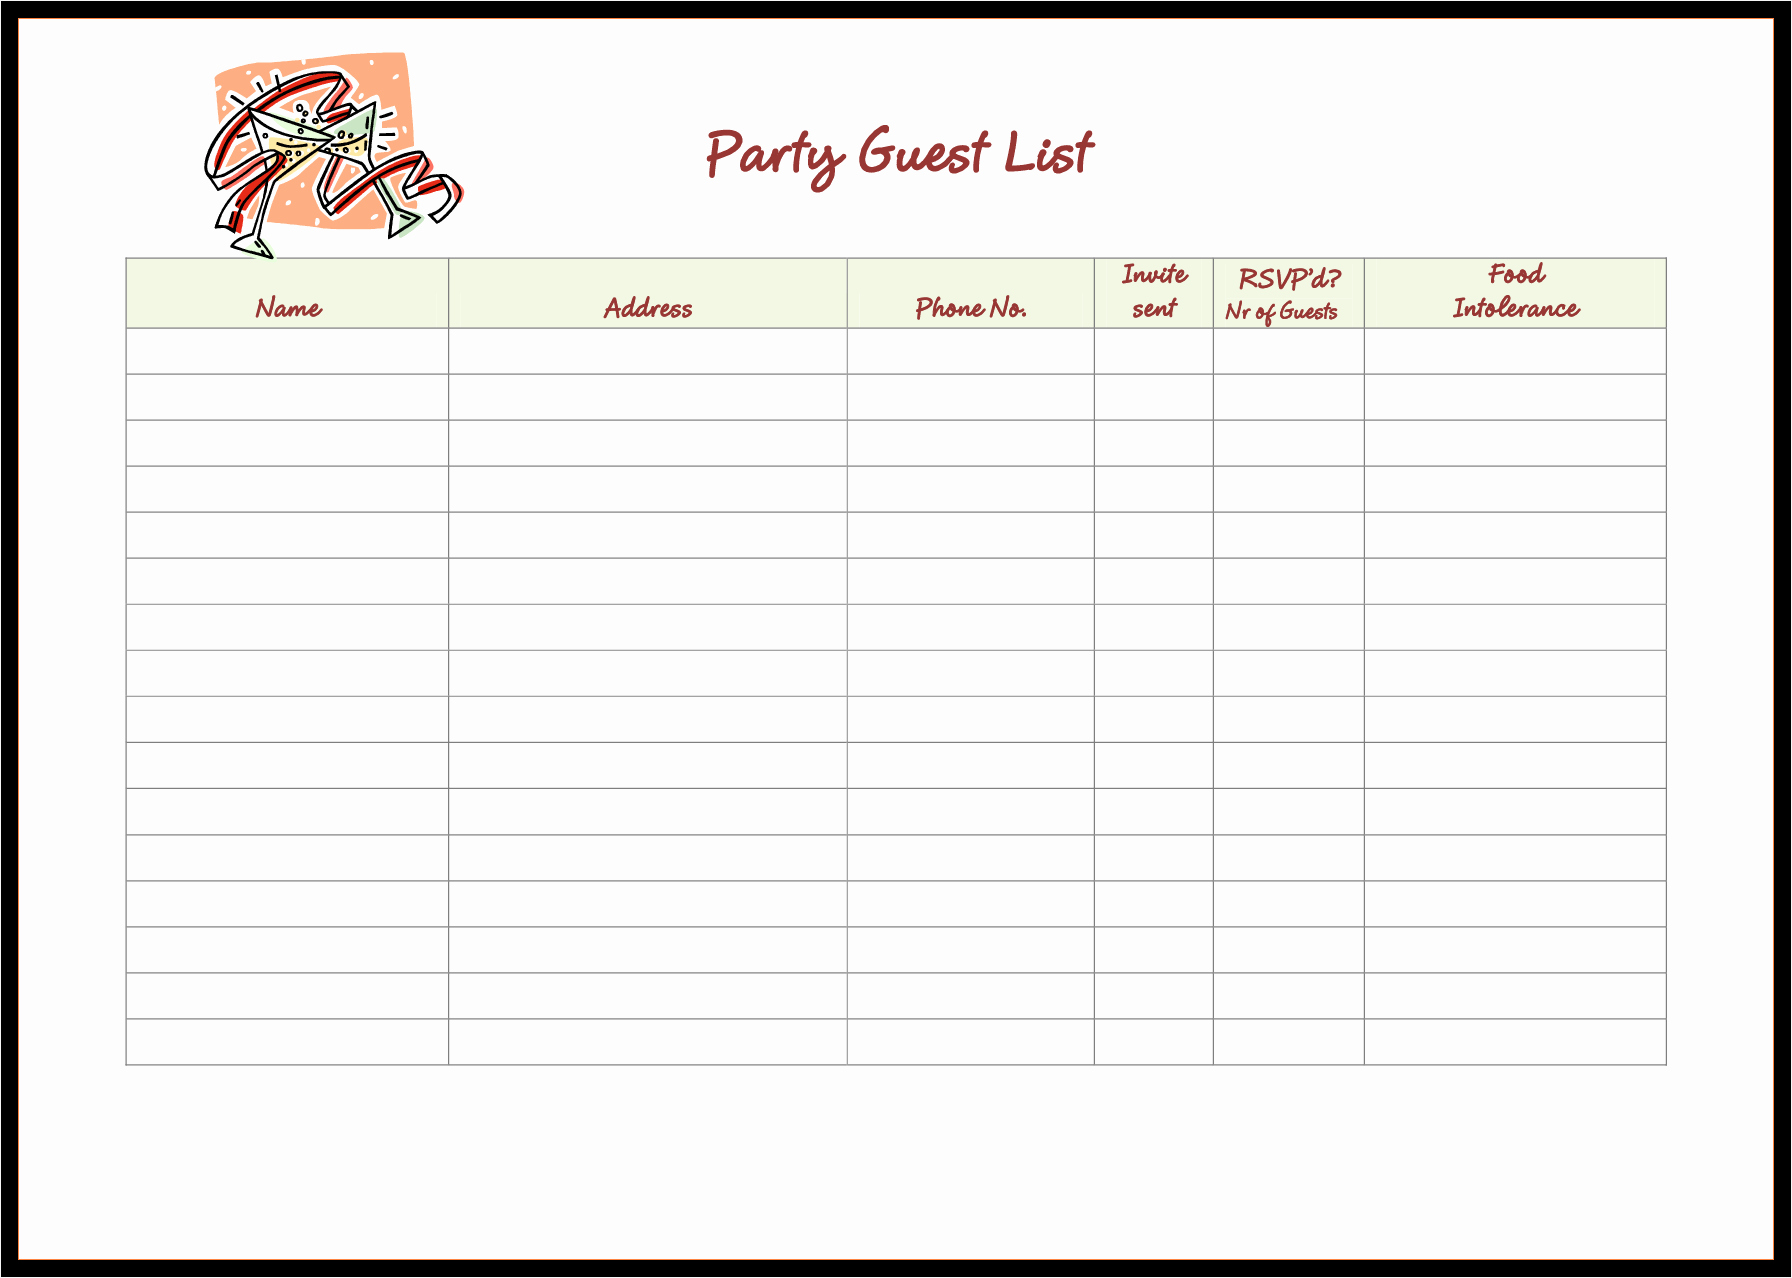 Party Guest List Template Beautiful Birthday Party Guest List Mughals